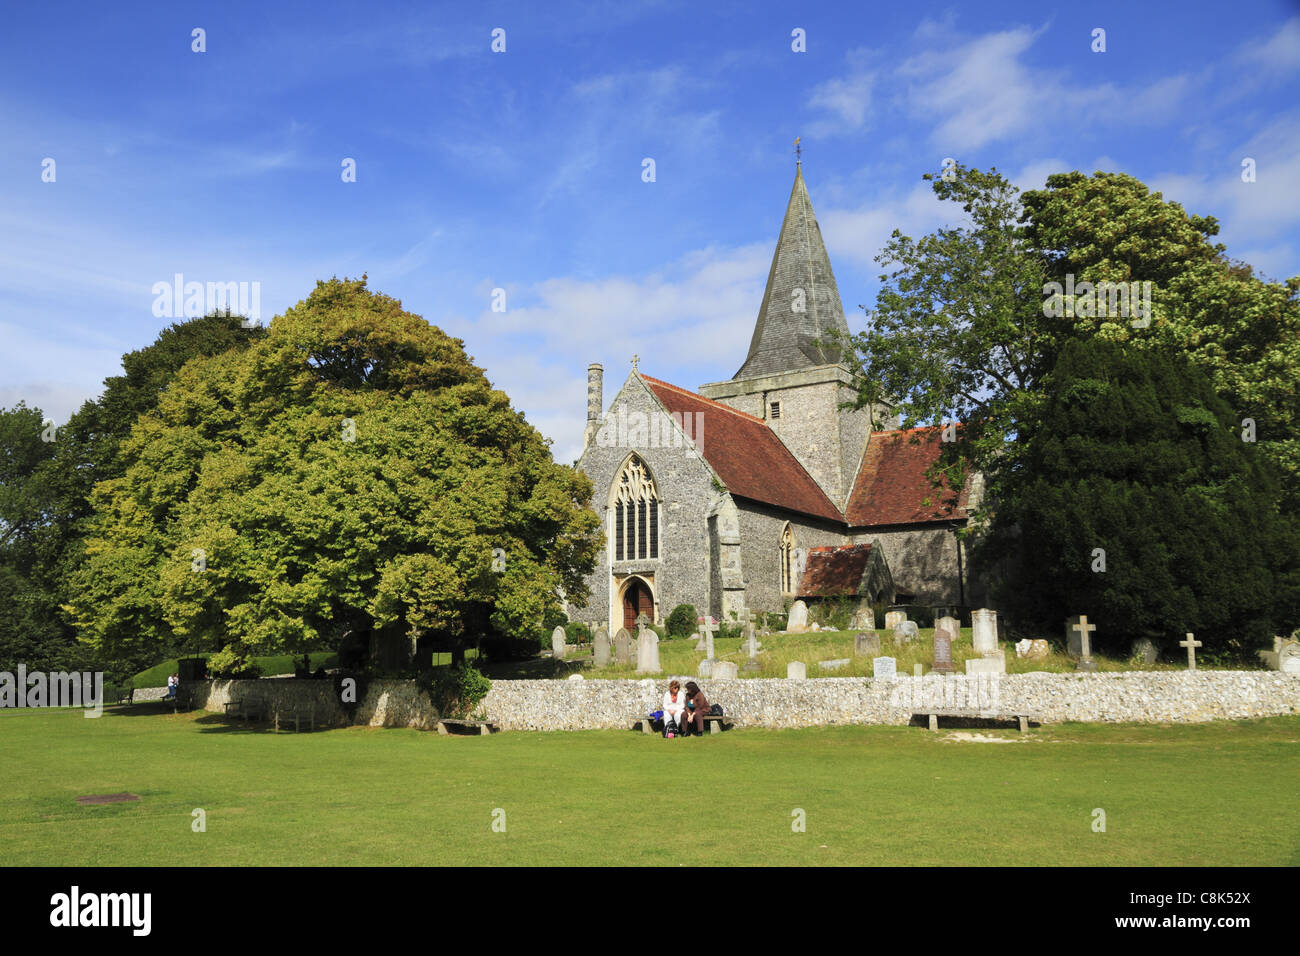 St Andrews Church overlooking the village green at Alfriston, East Sussex, England. Stock Photo